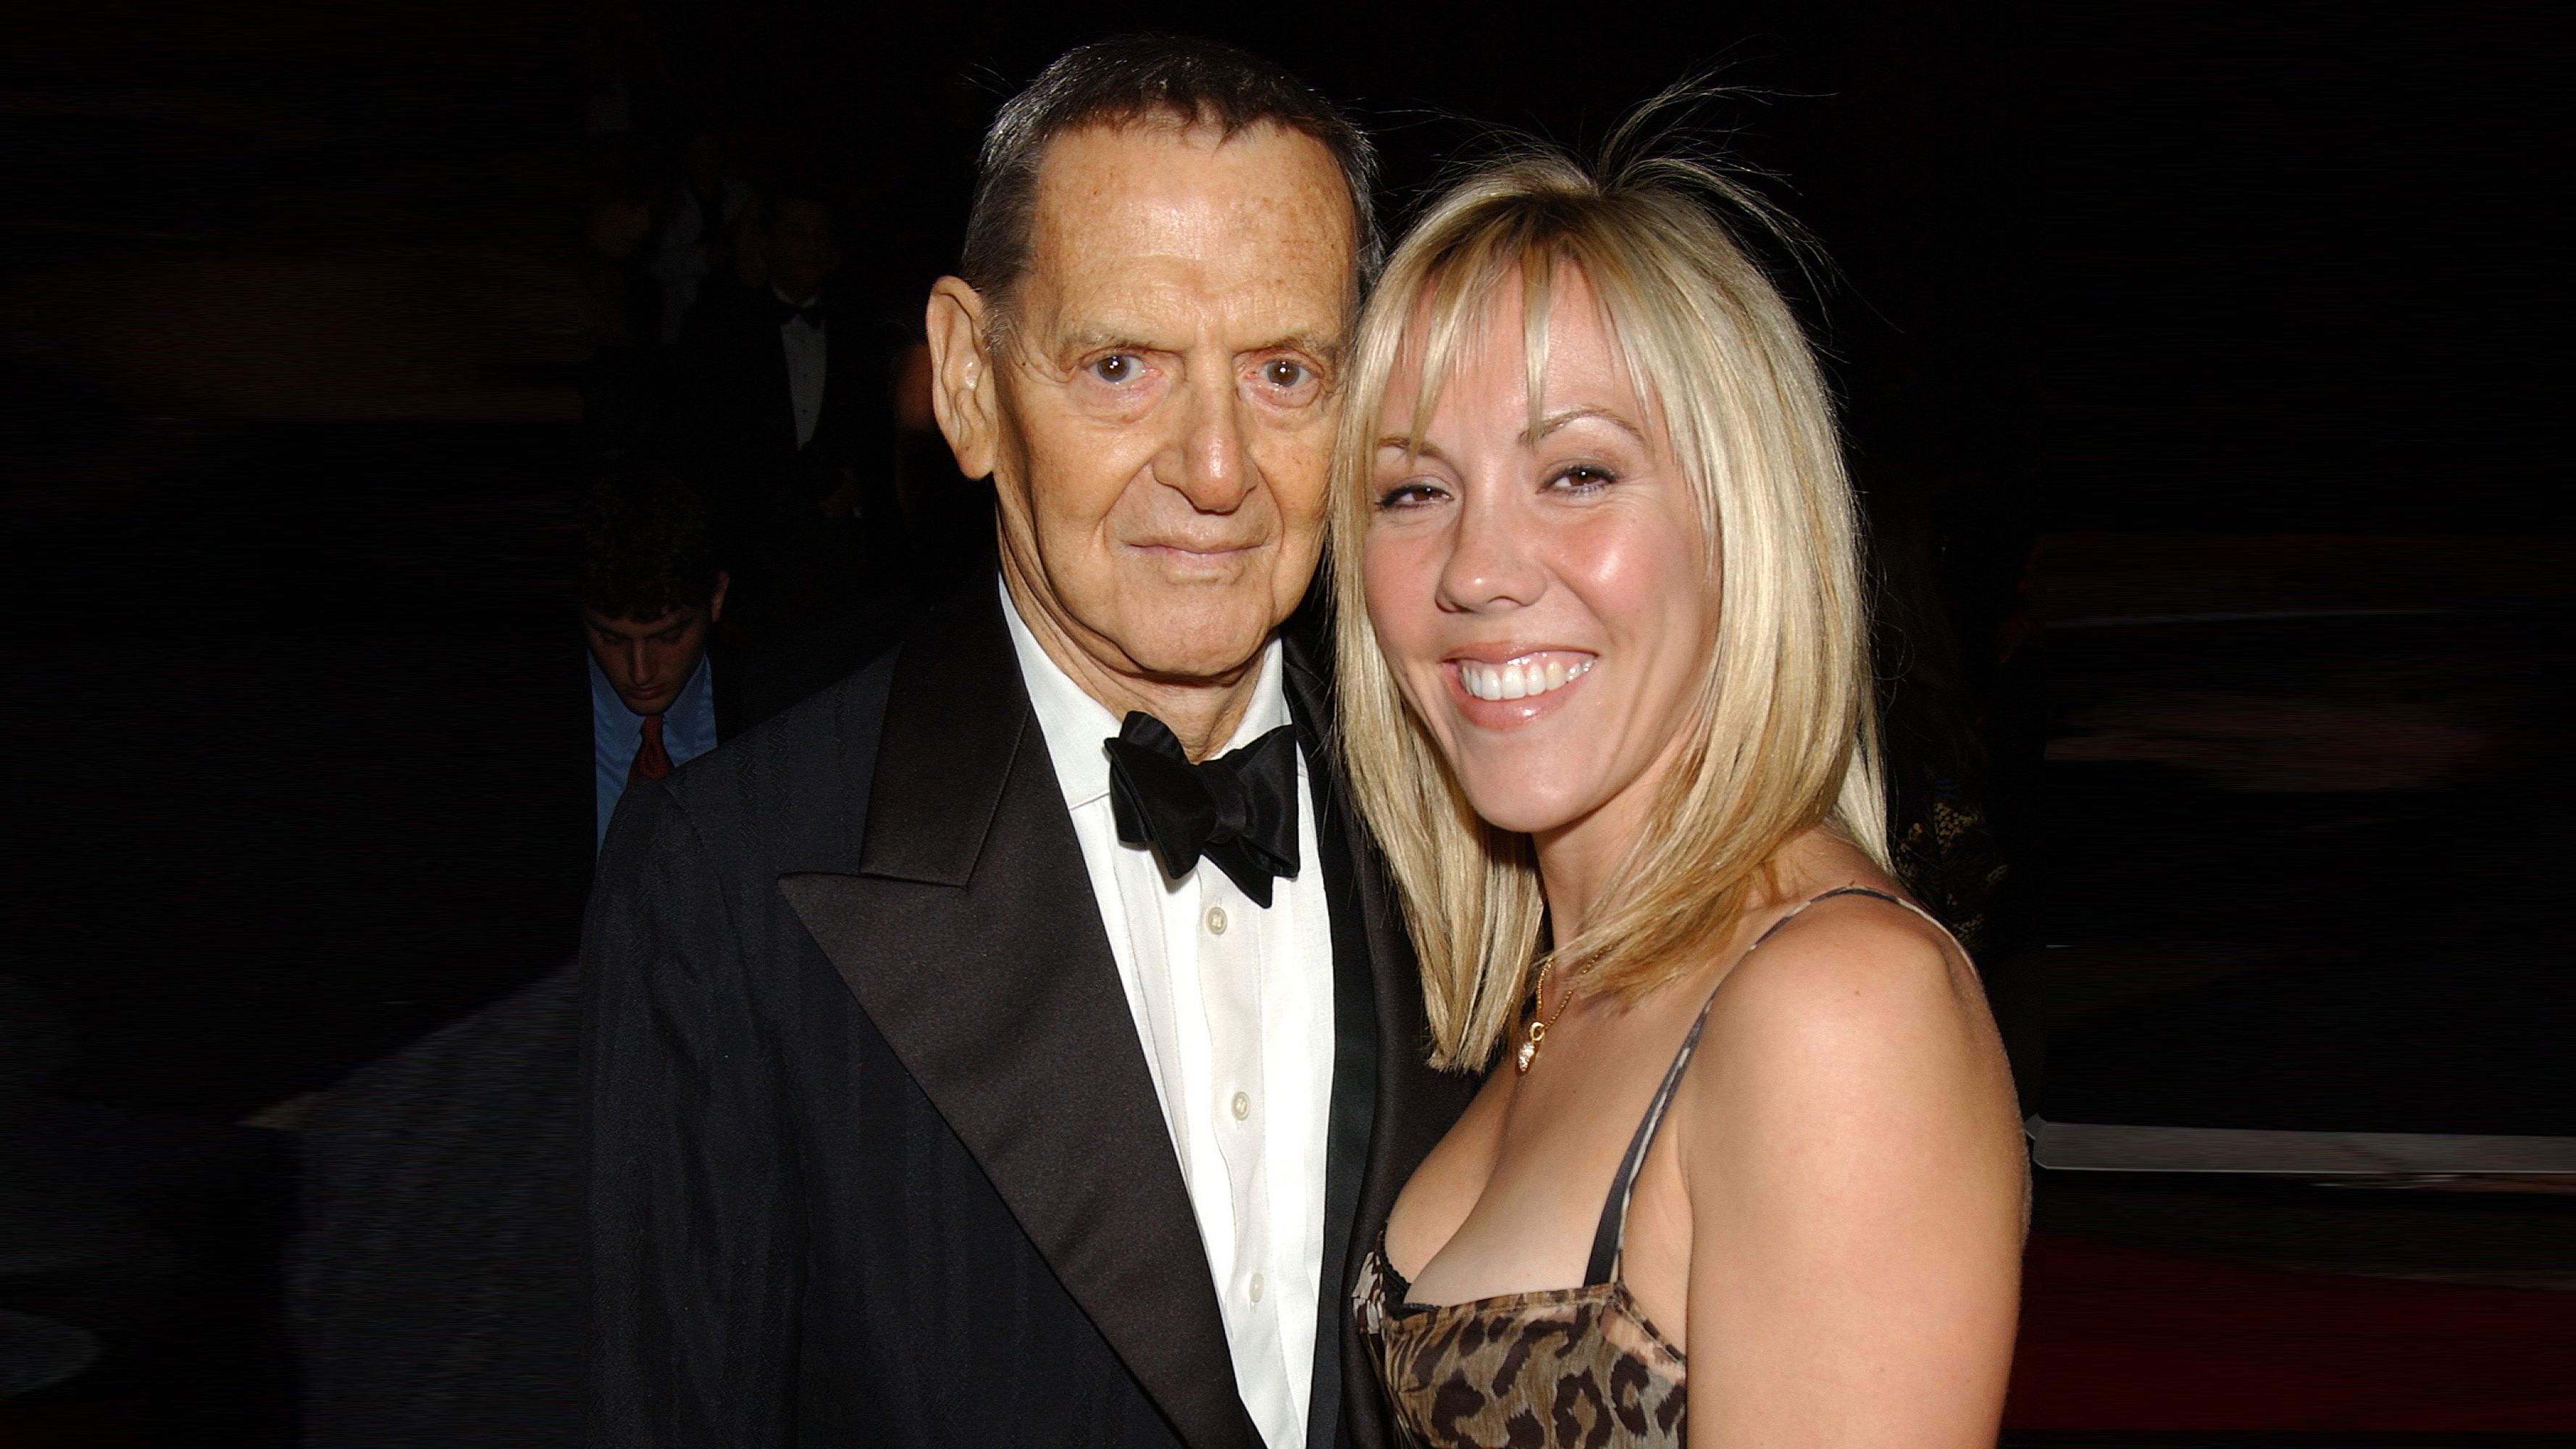 Heather Randall, Wife of Tony Randall The Marie Claire Interview Marie Claire image pic